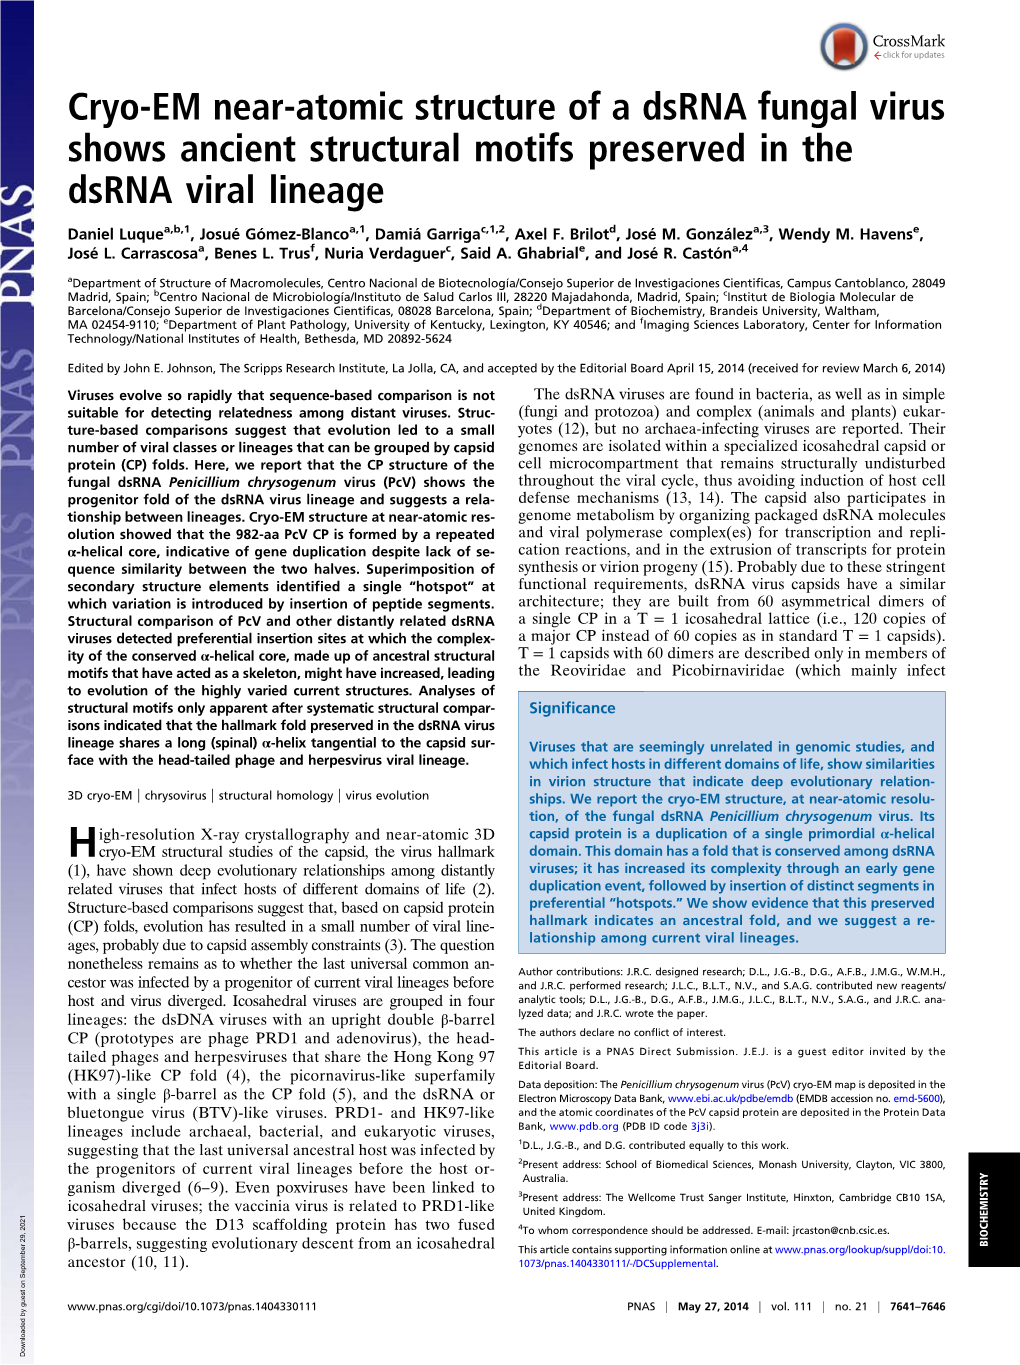 Cryo-EM Near-Atomic Structure of a Dsrna Fungal Virus Shows Ancient Structural Motifs Preserved in the Dsrna Viral Lineage